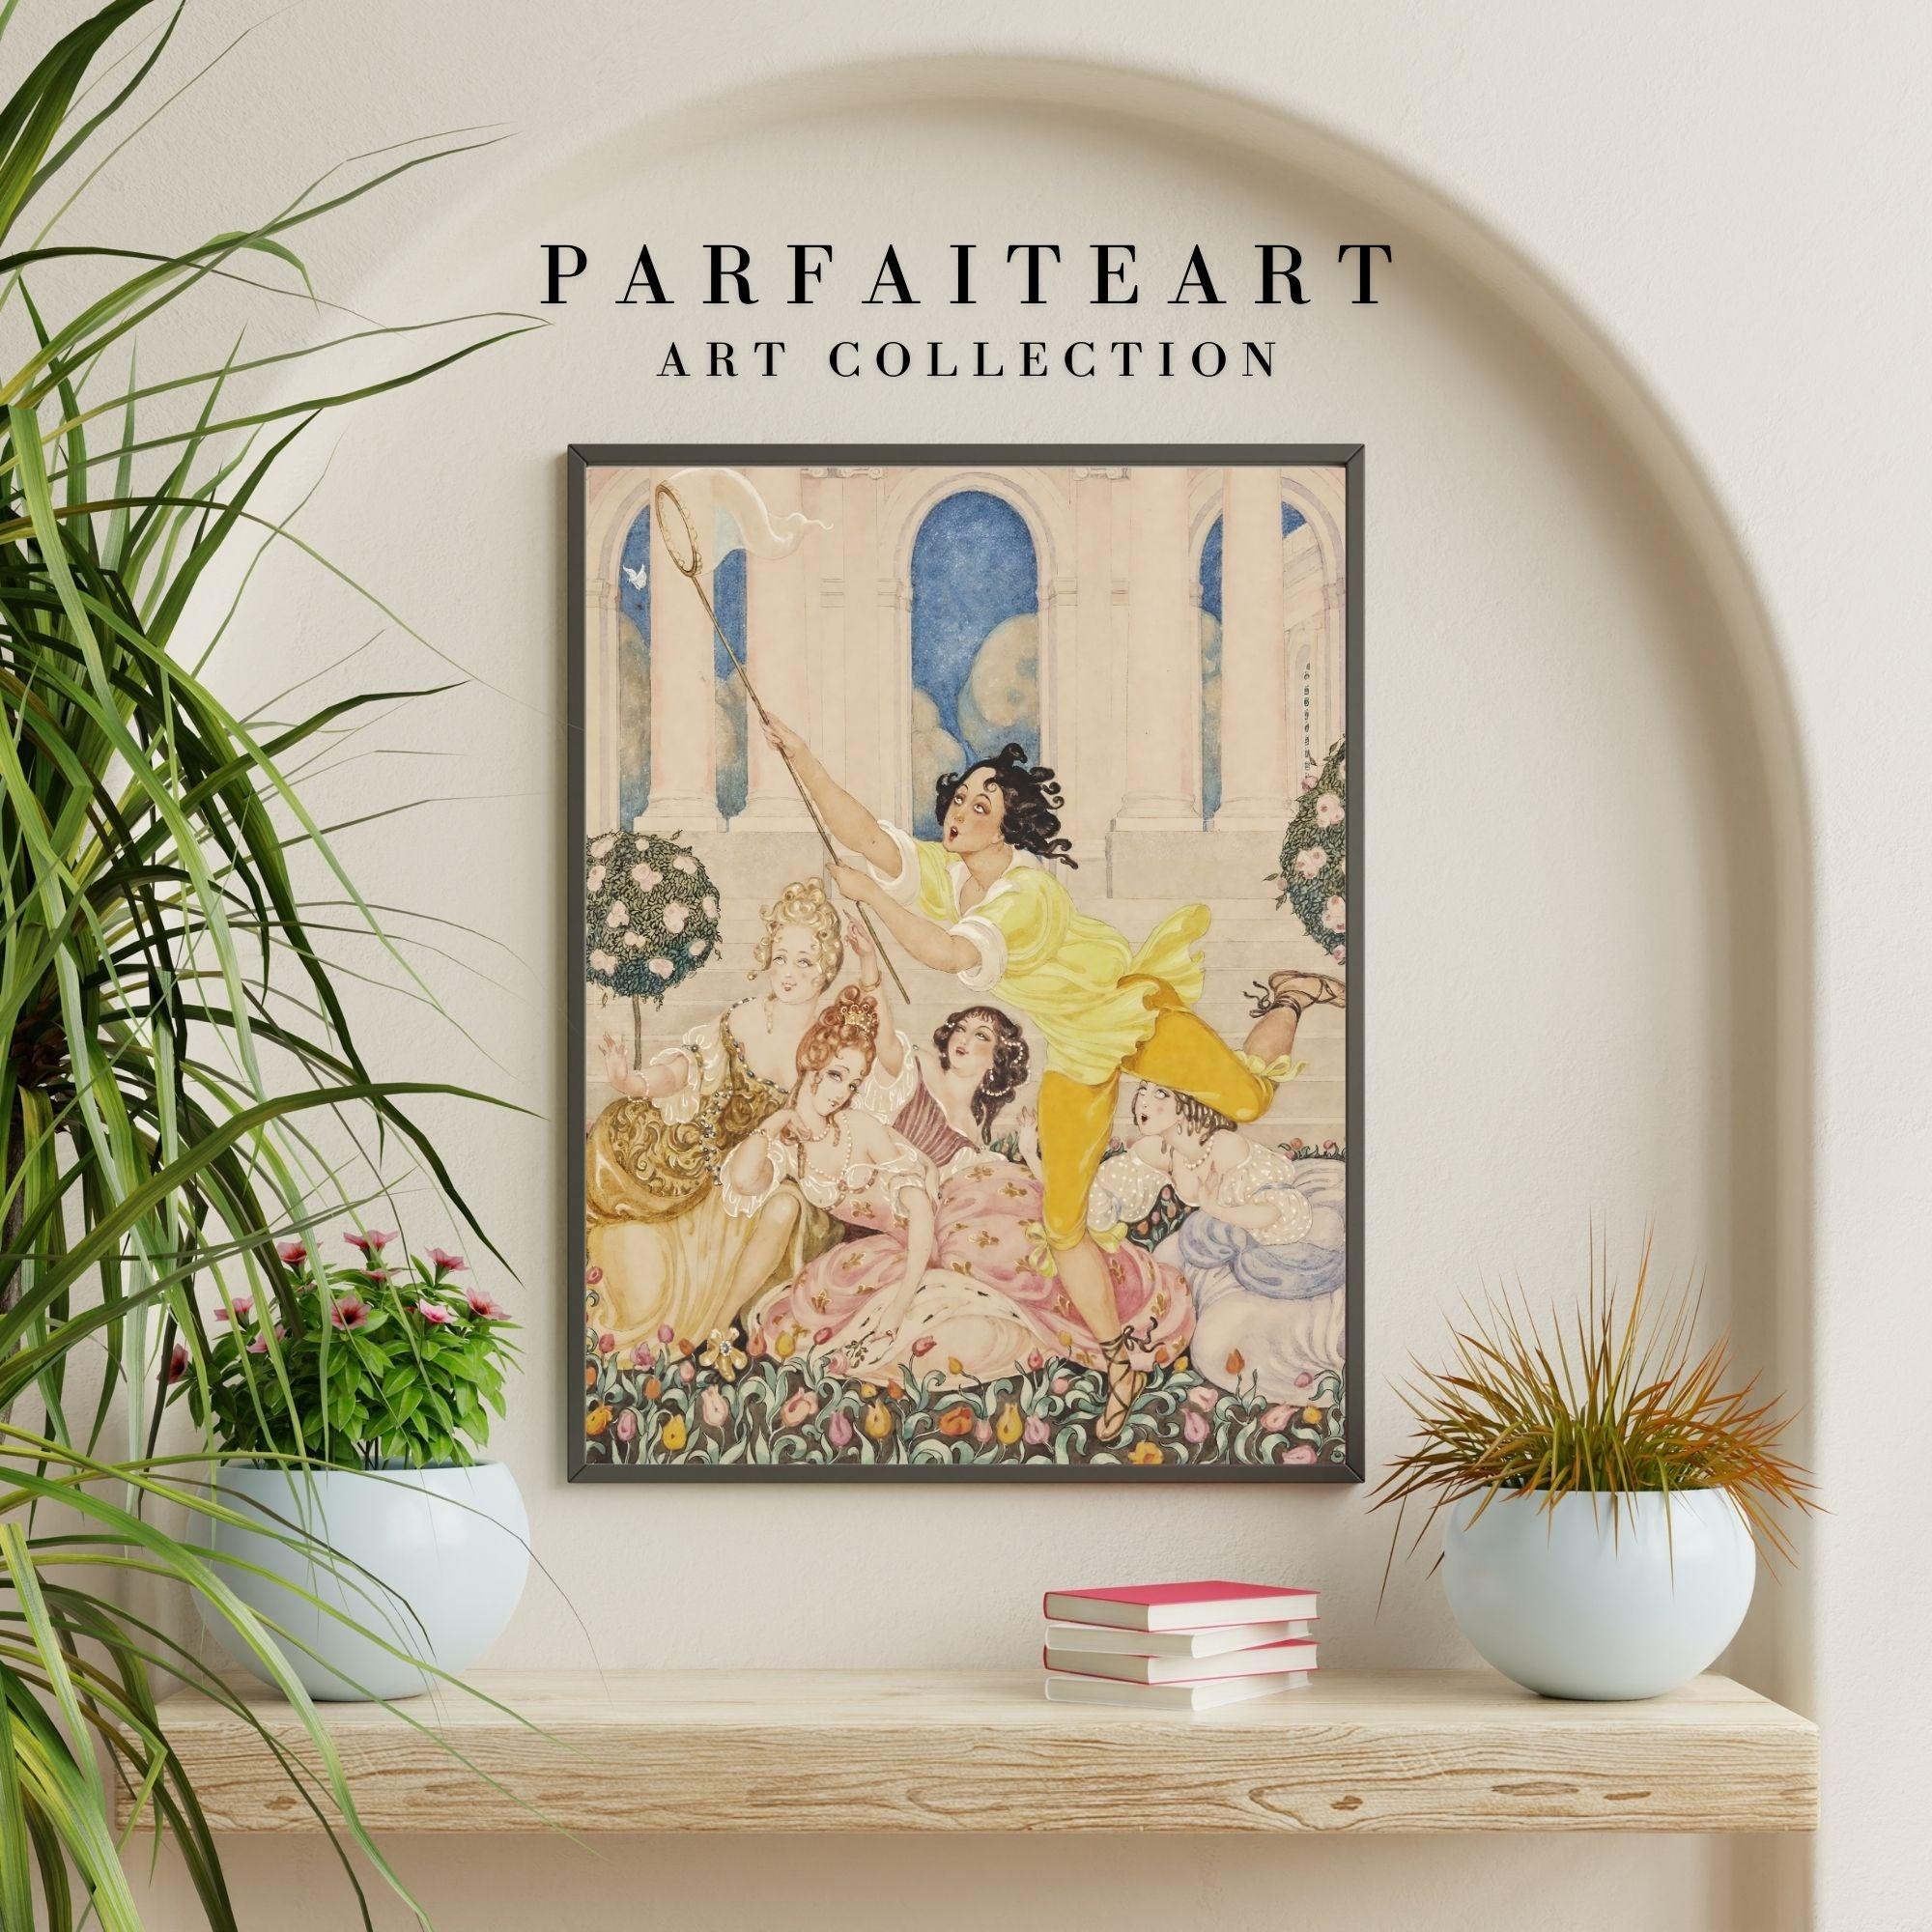 Decorative Wall Art Prints of Renaissance and Rococo Era Beauties on Printable Canvases using Giclée Printing Techniques #100